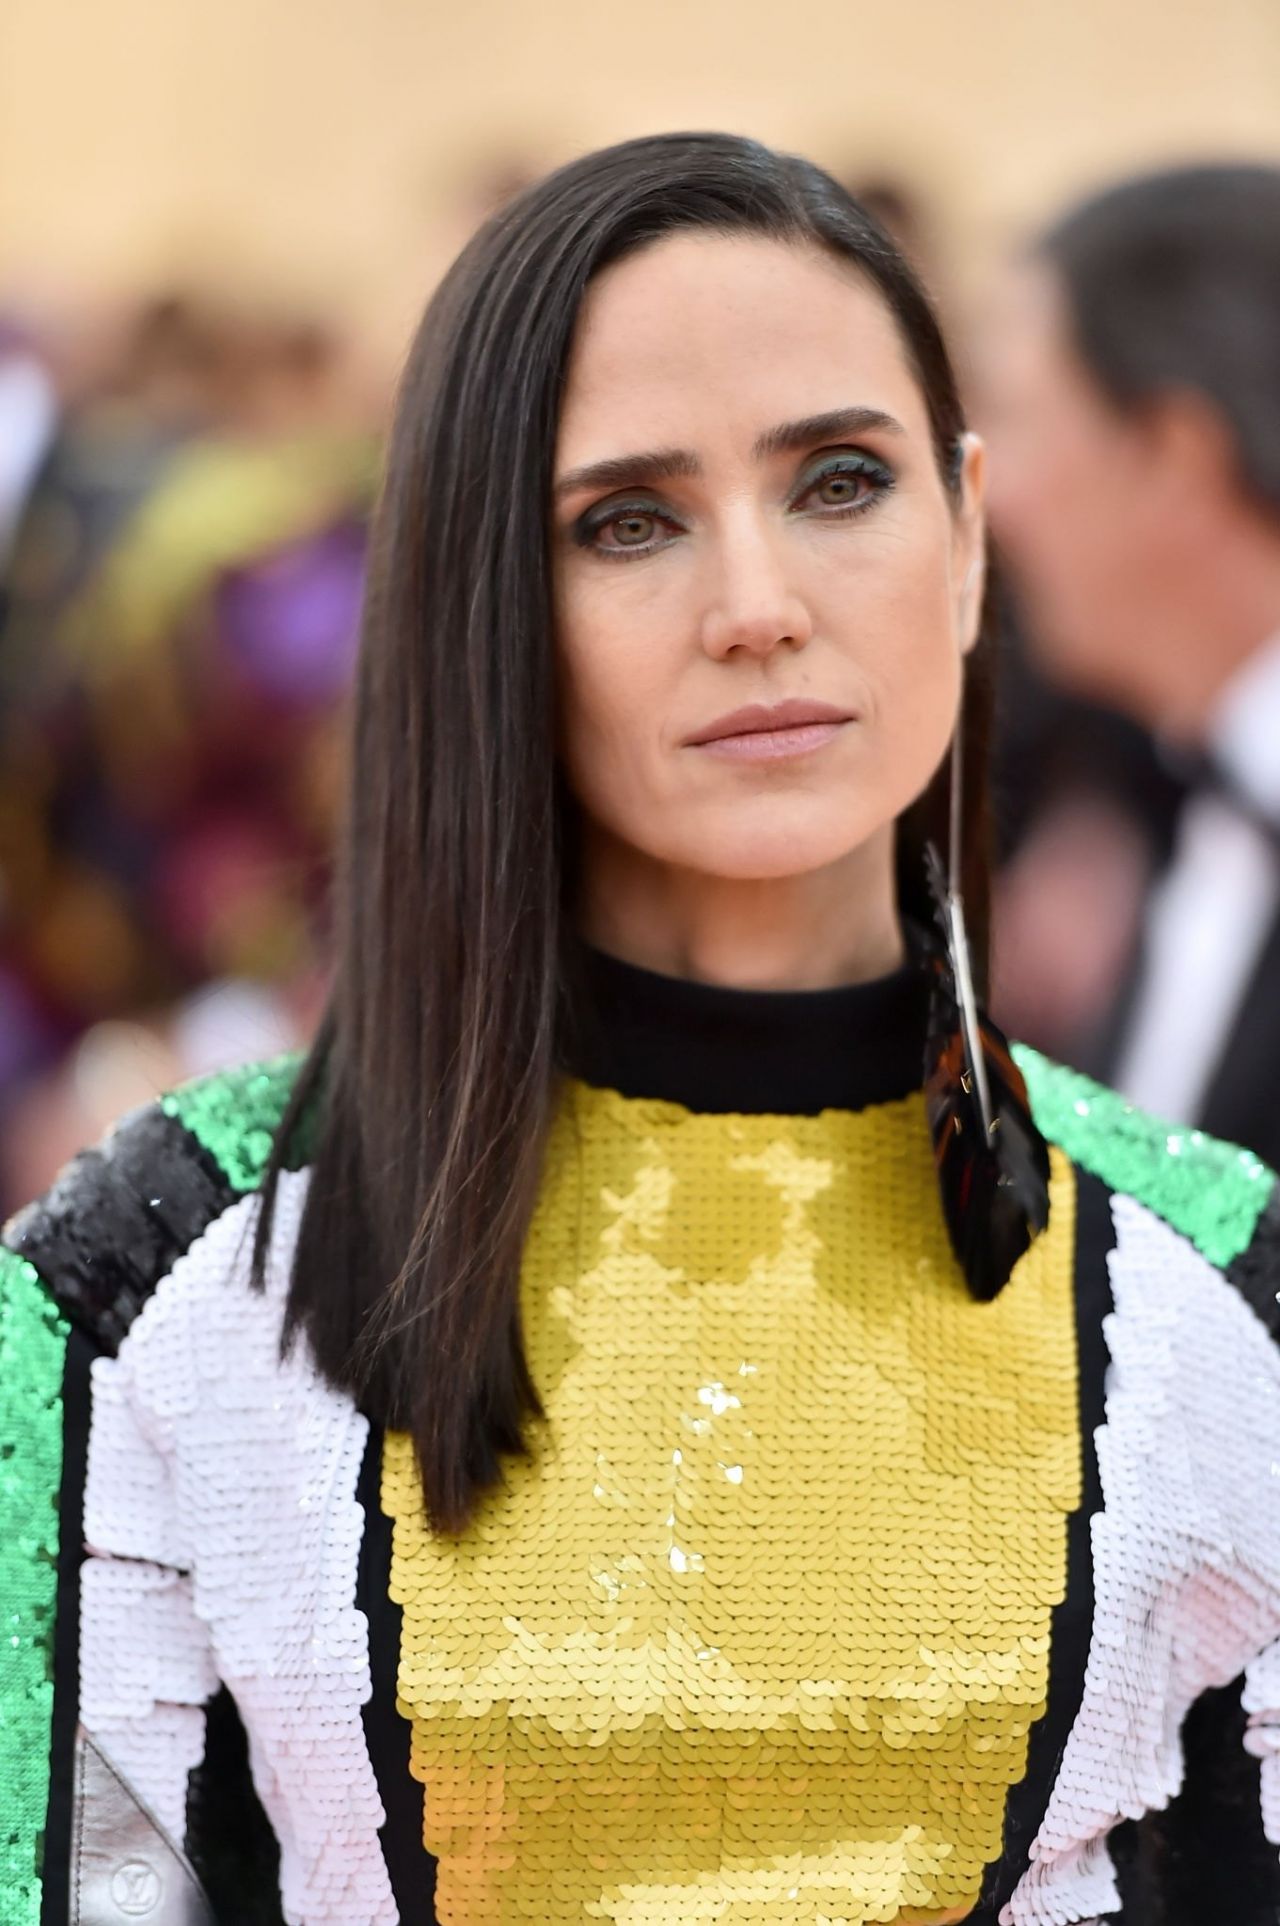 All of Jennifer Connelly's Met Gala Looks From 2001-2019: Photos